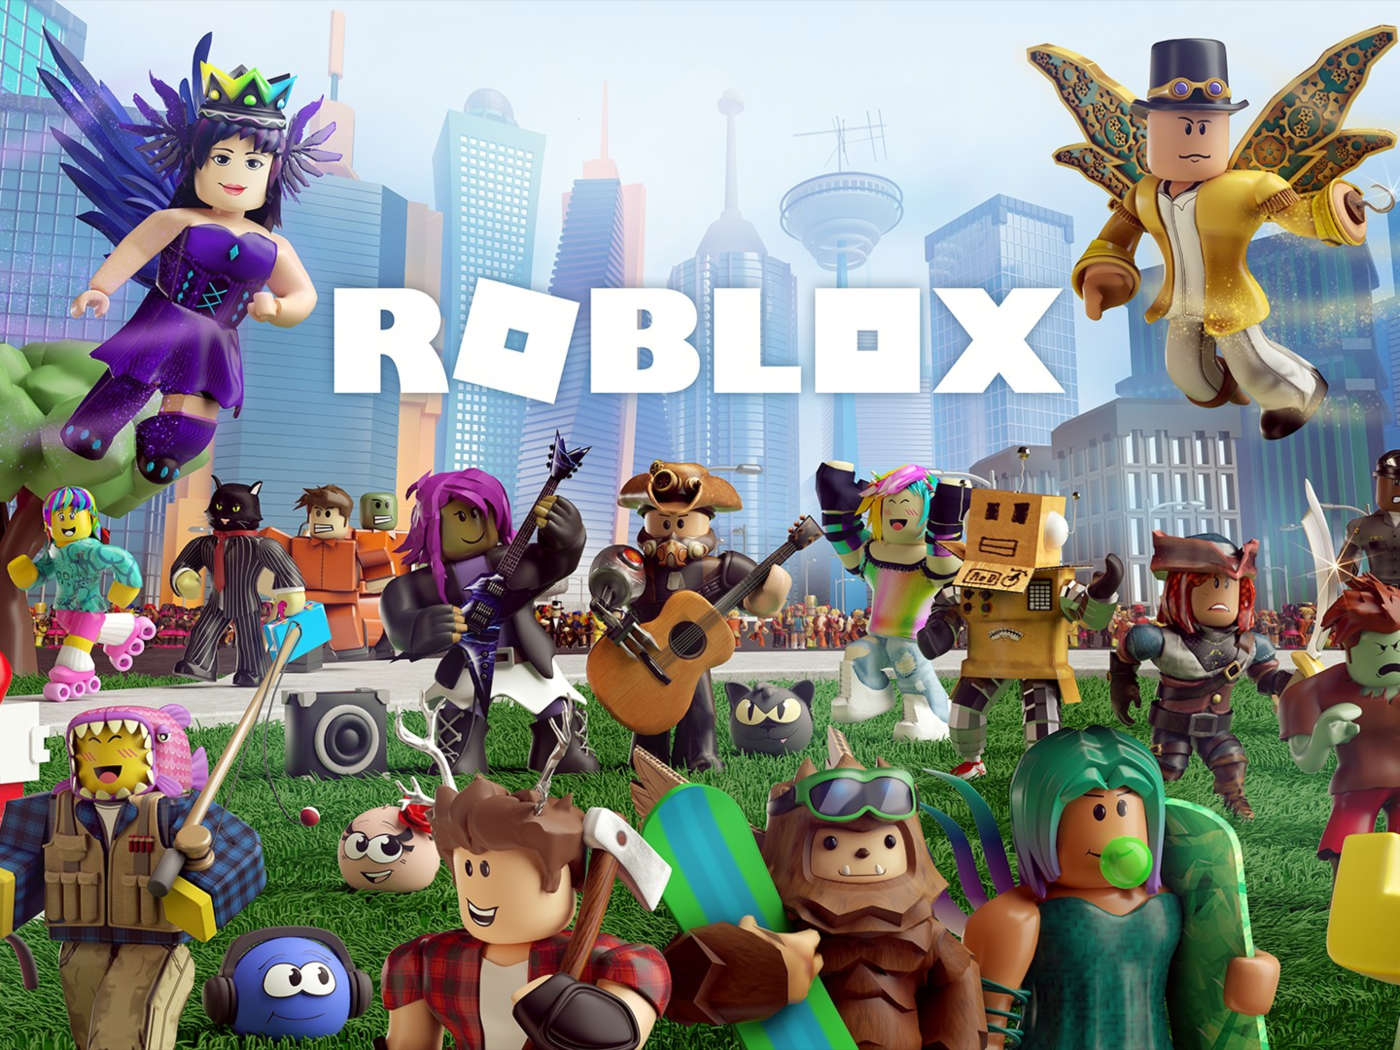 Download Explore your Avatar's Possibilities in Roblox